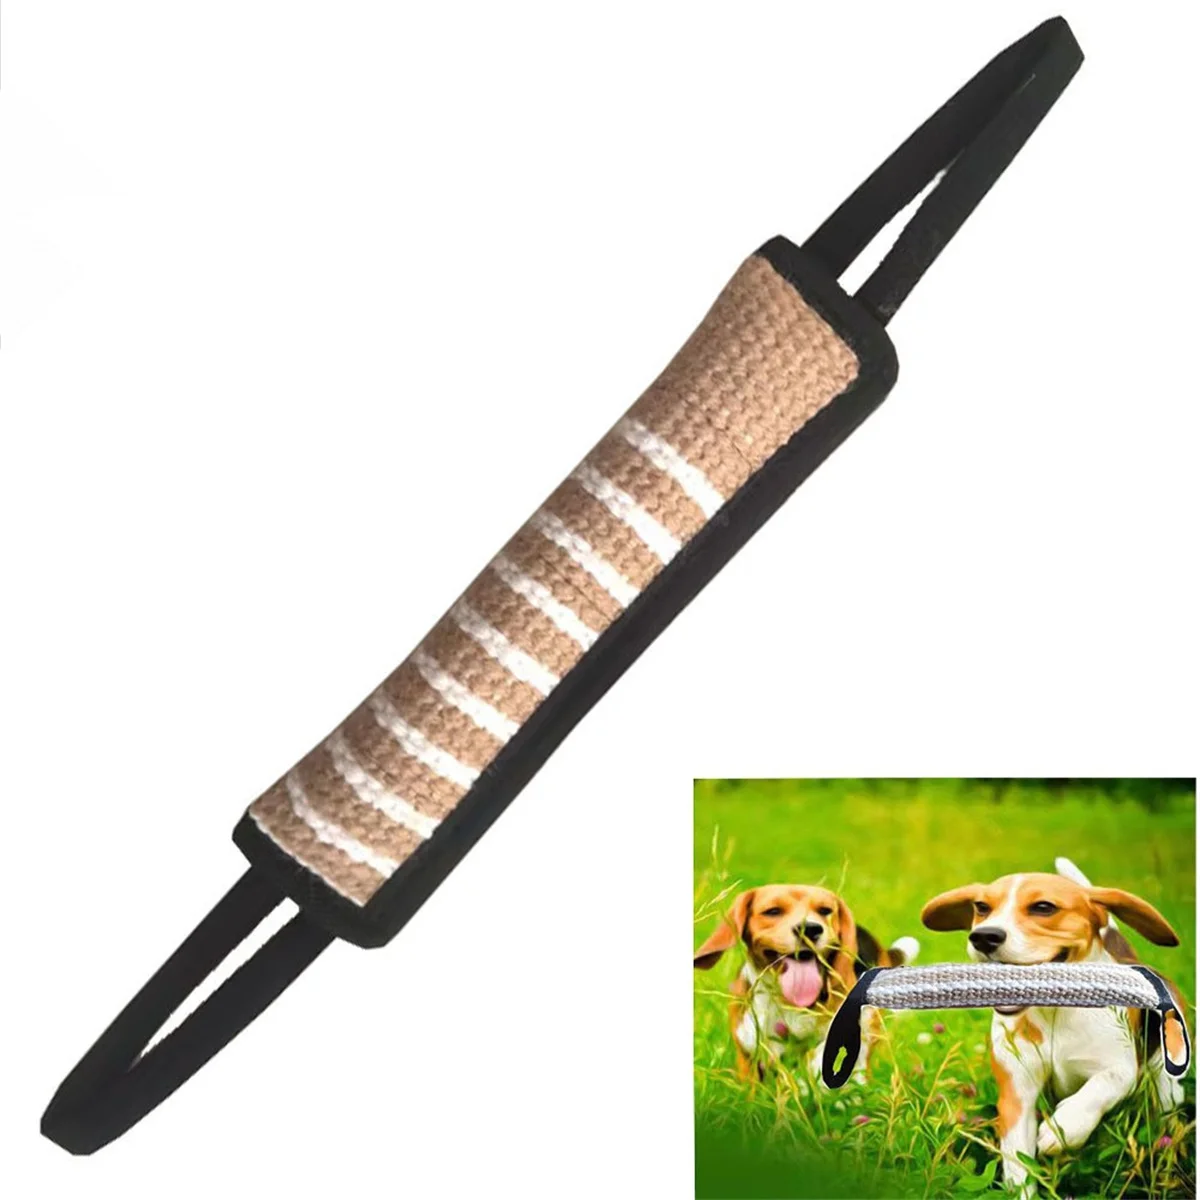 

Durable Dog Training Tug Toy Dog Bite Stick Pillow Puppy Toy with Rope Handles Large Dog Training Interactive Play Chewing Toys